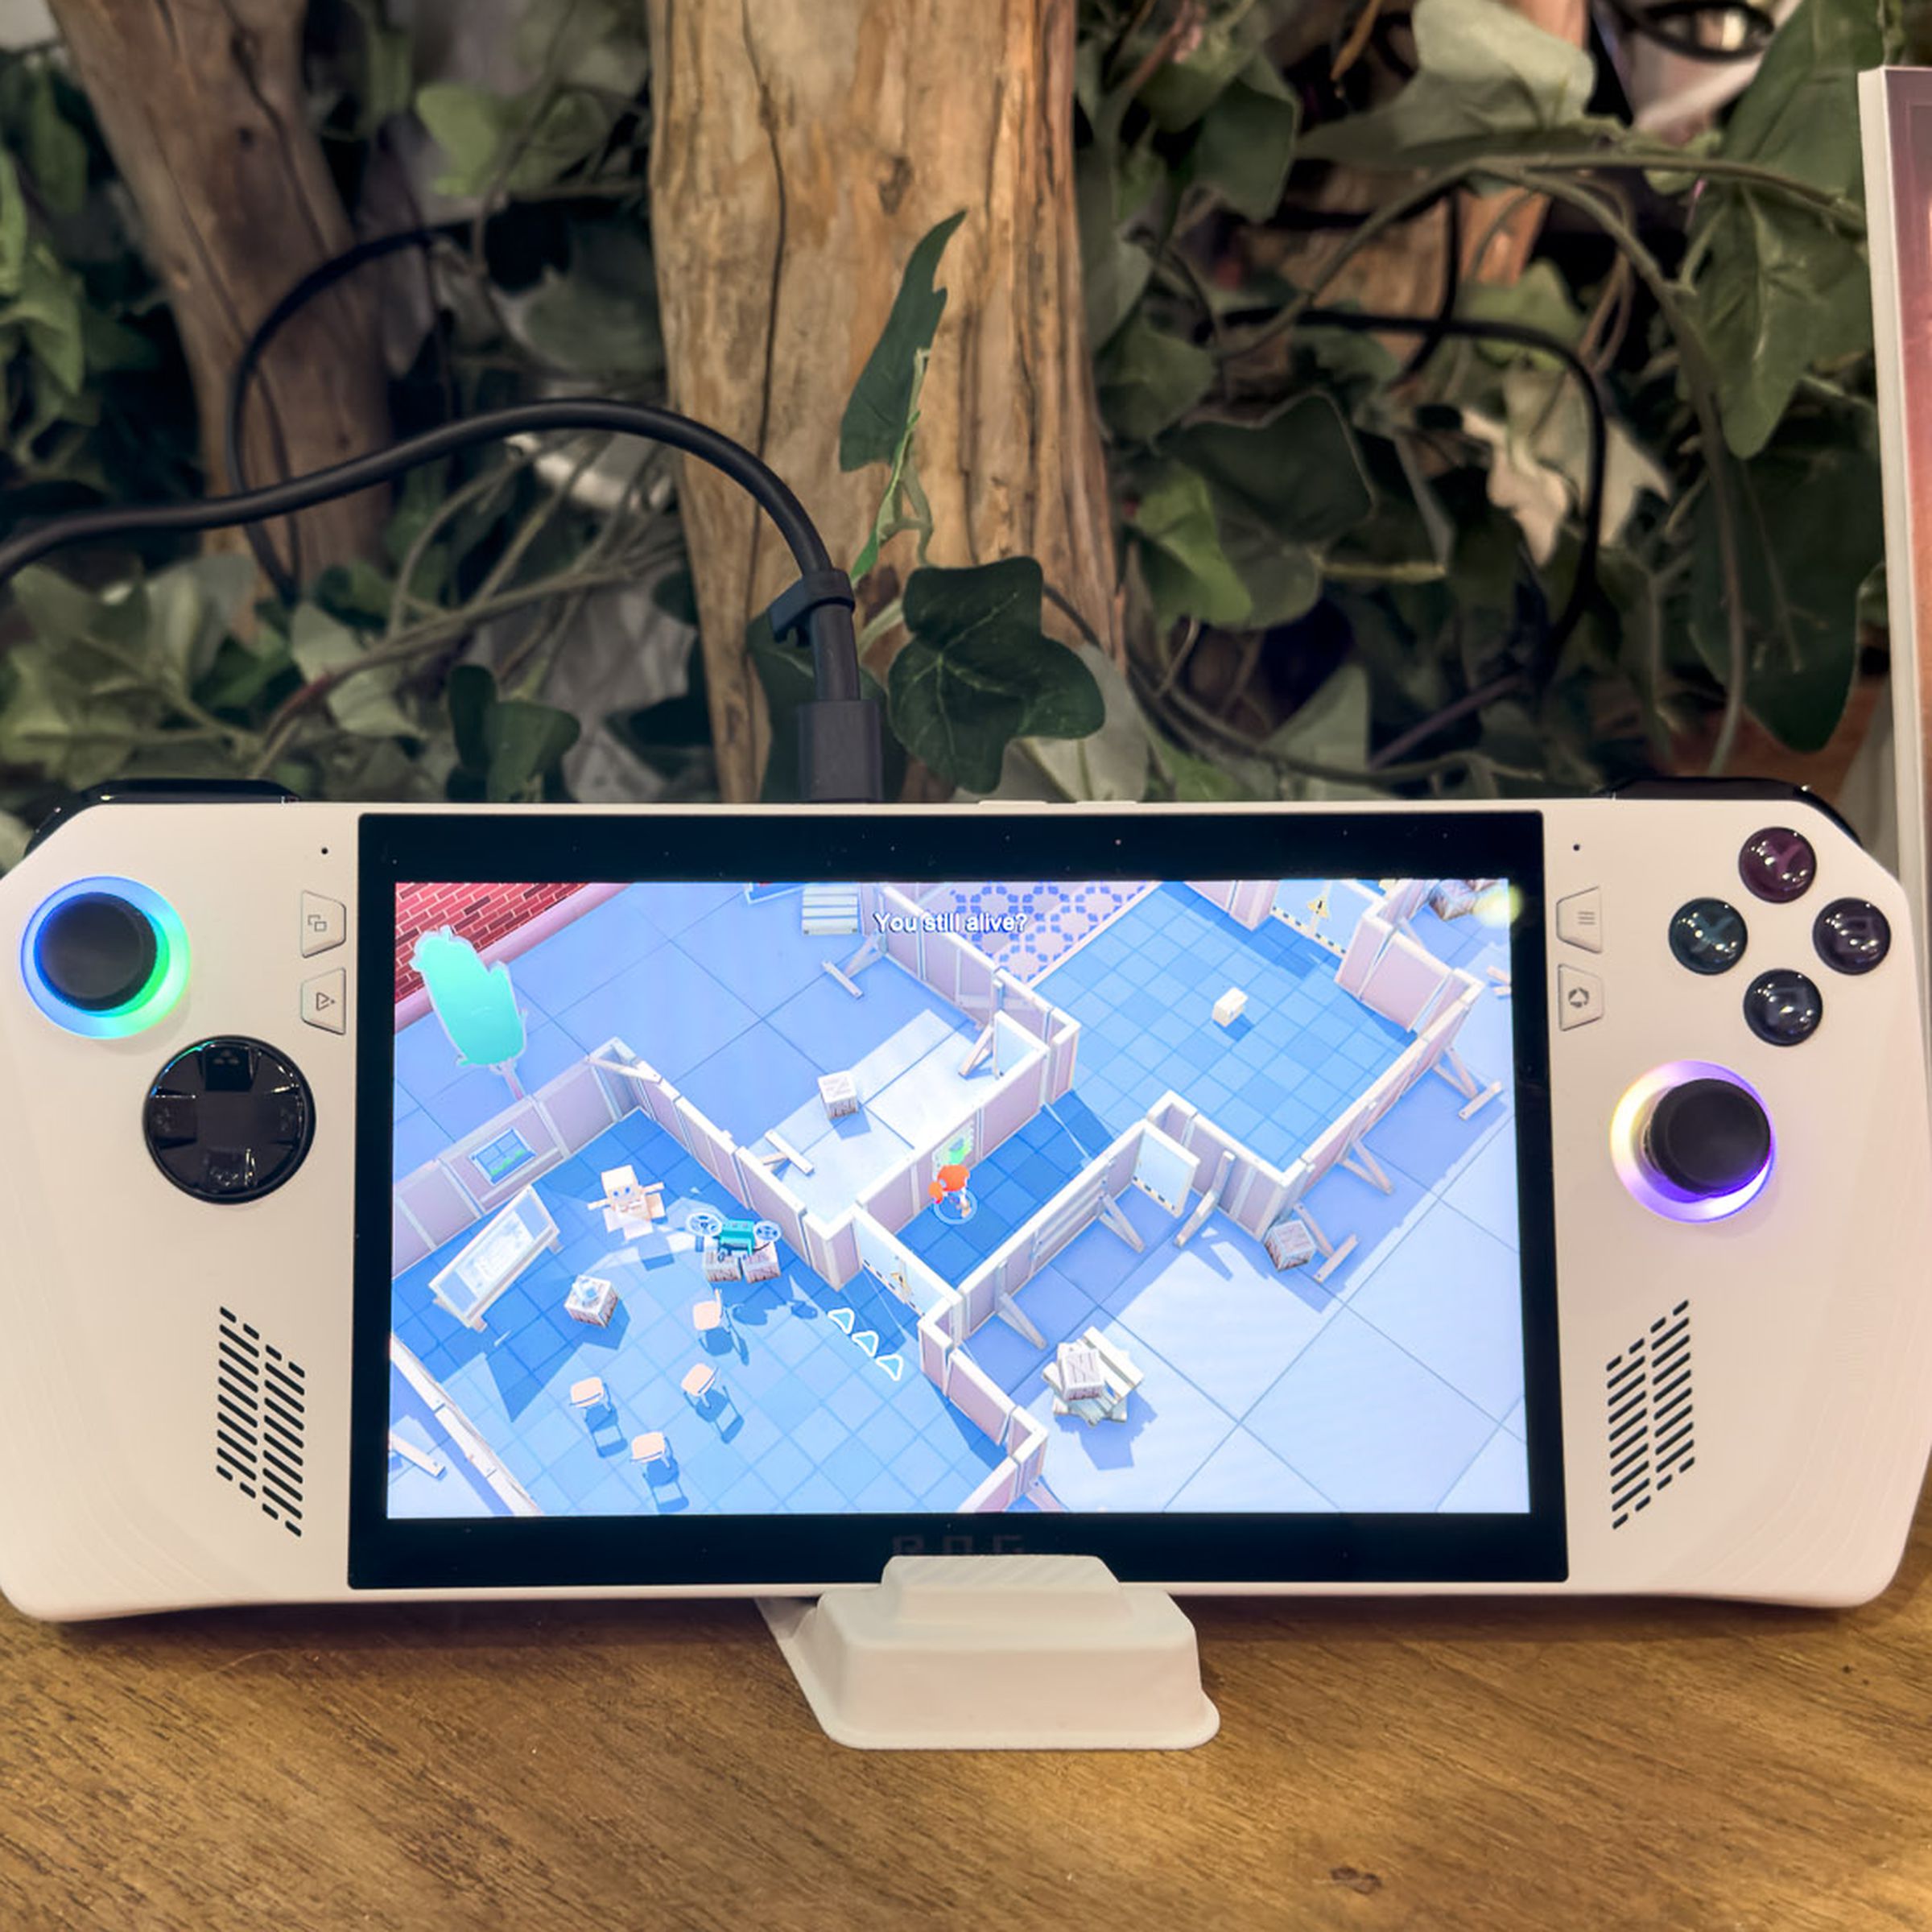 A white portable gaming handheld, a bit like a Nintendo Switch but with fixed controllers, on a stand on a wooden table with greenery in the background.